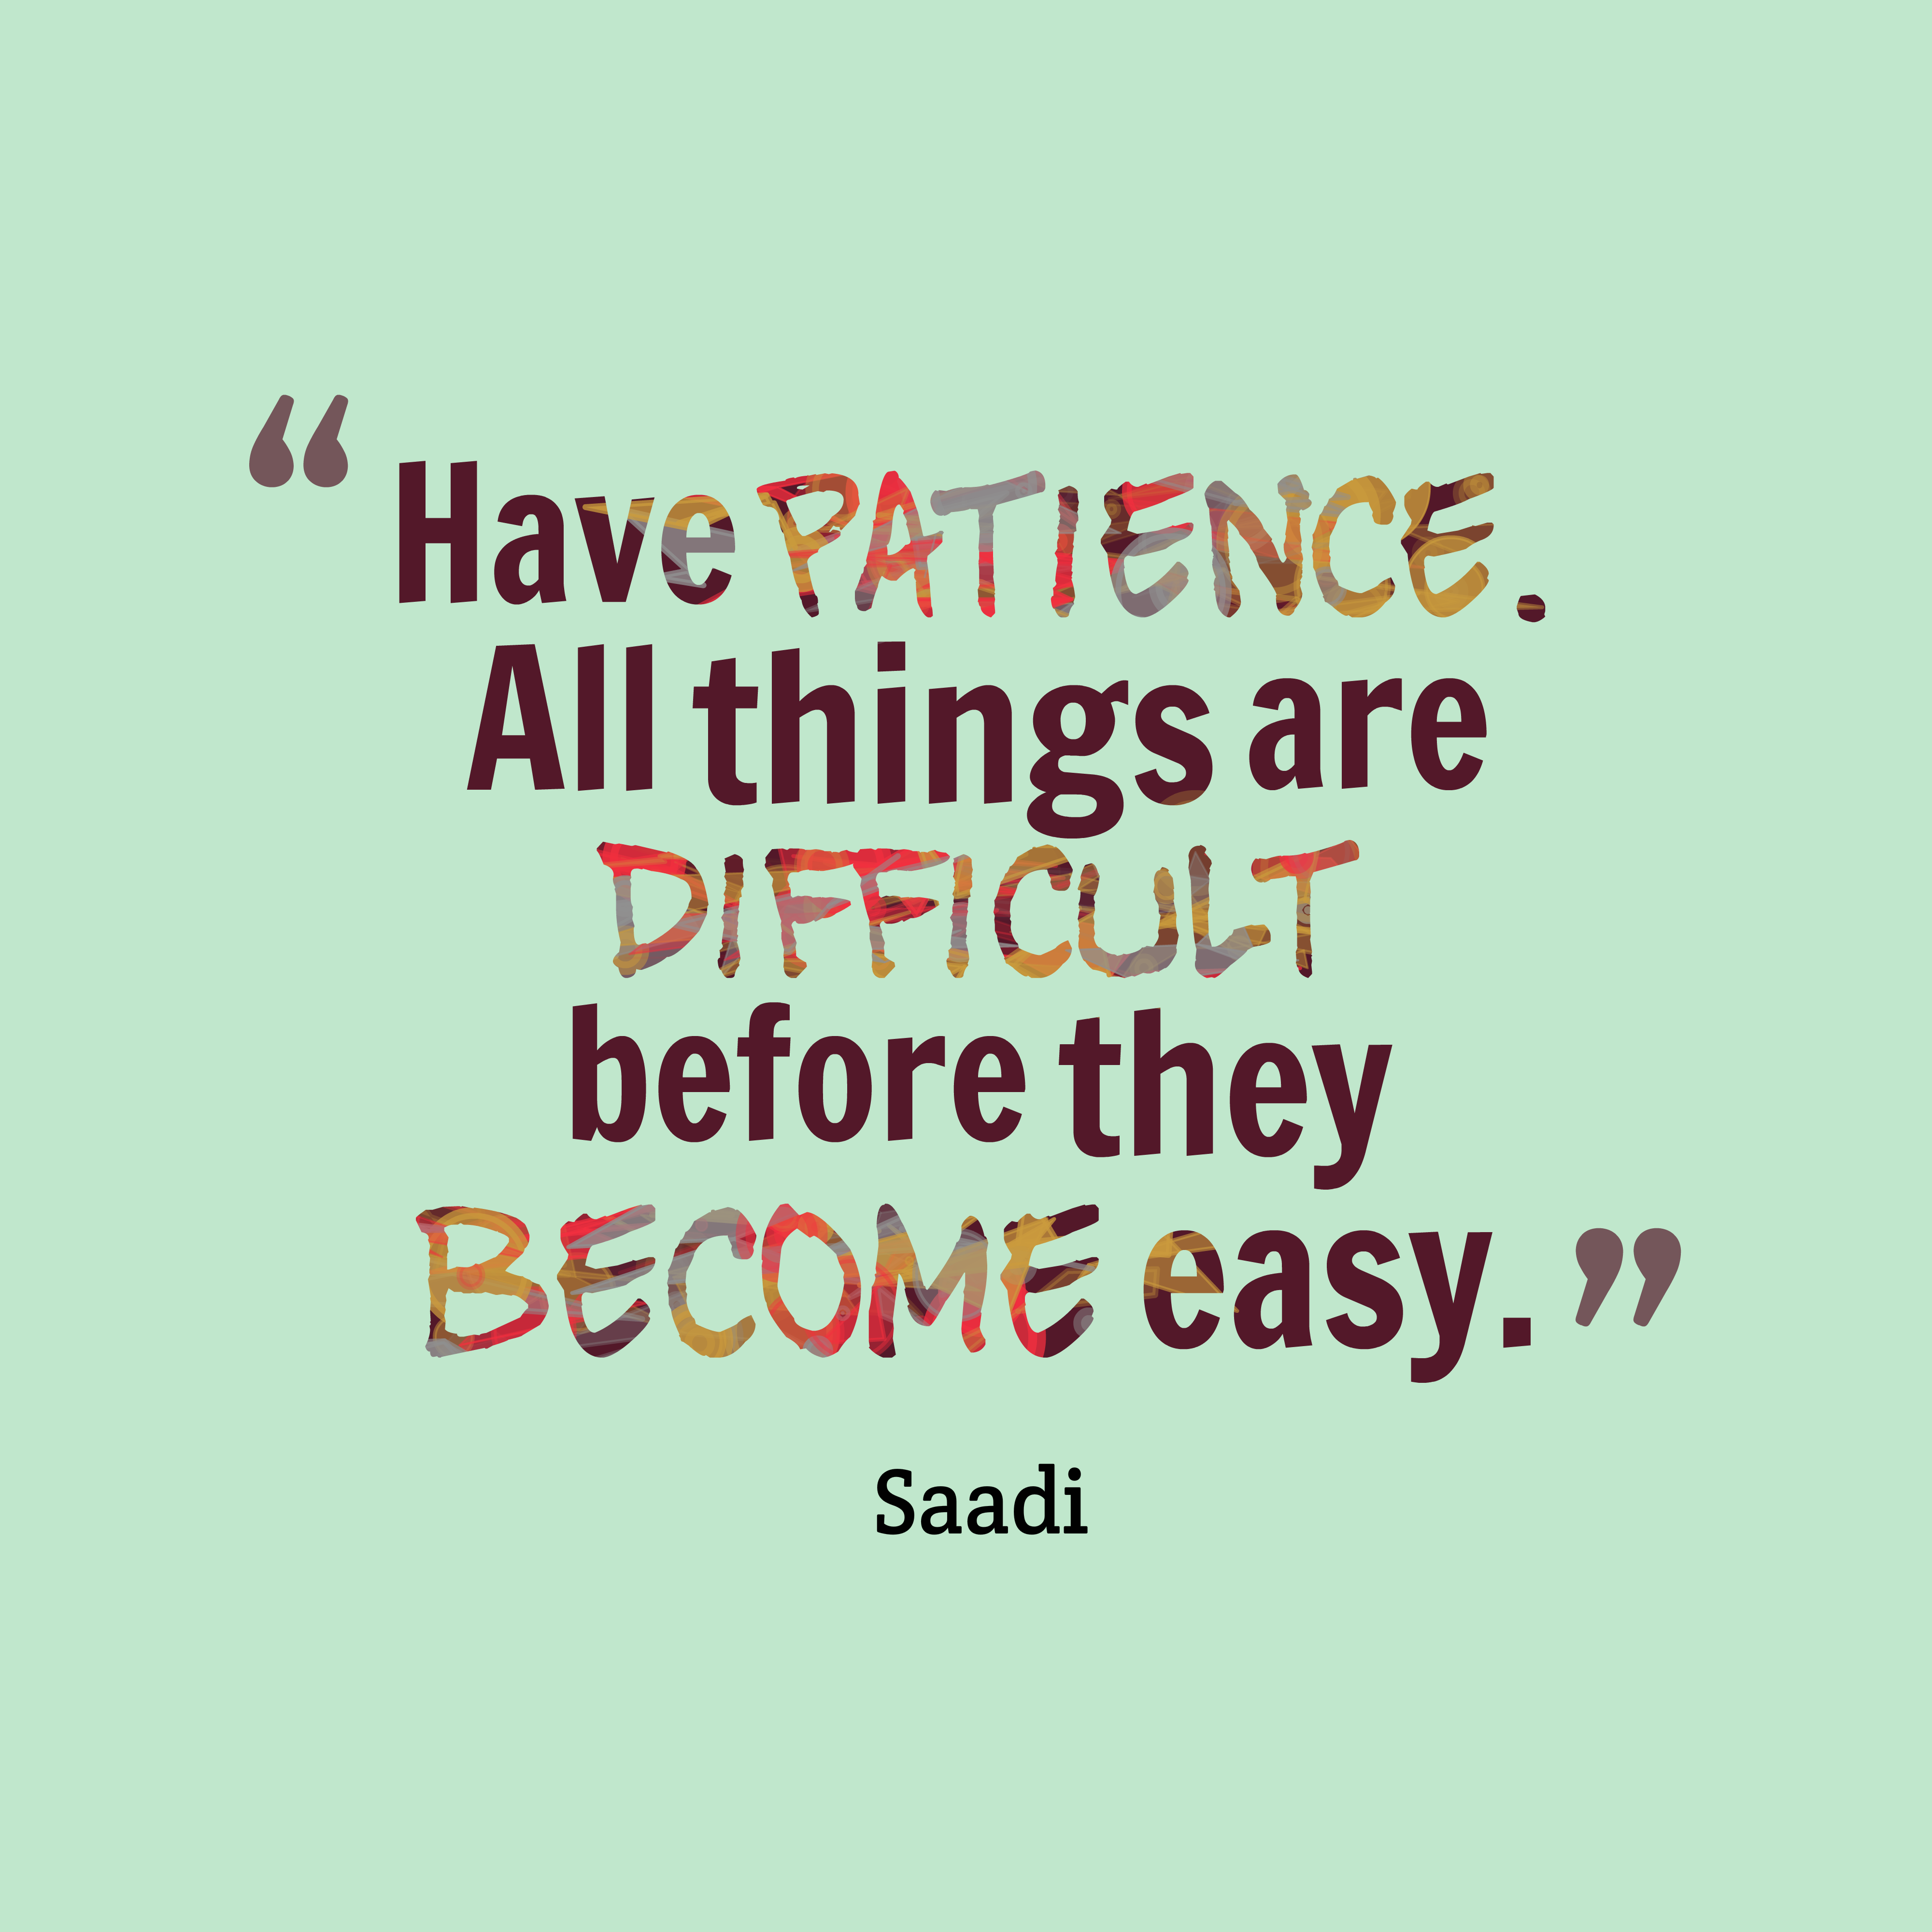 Have patience. All things are difficult before they become easy. Saadi